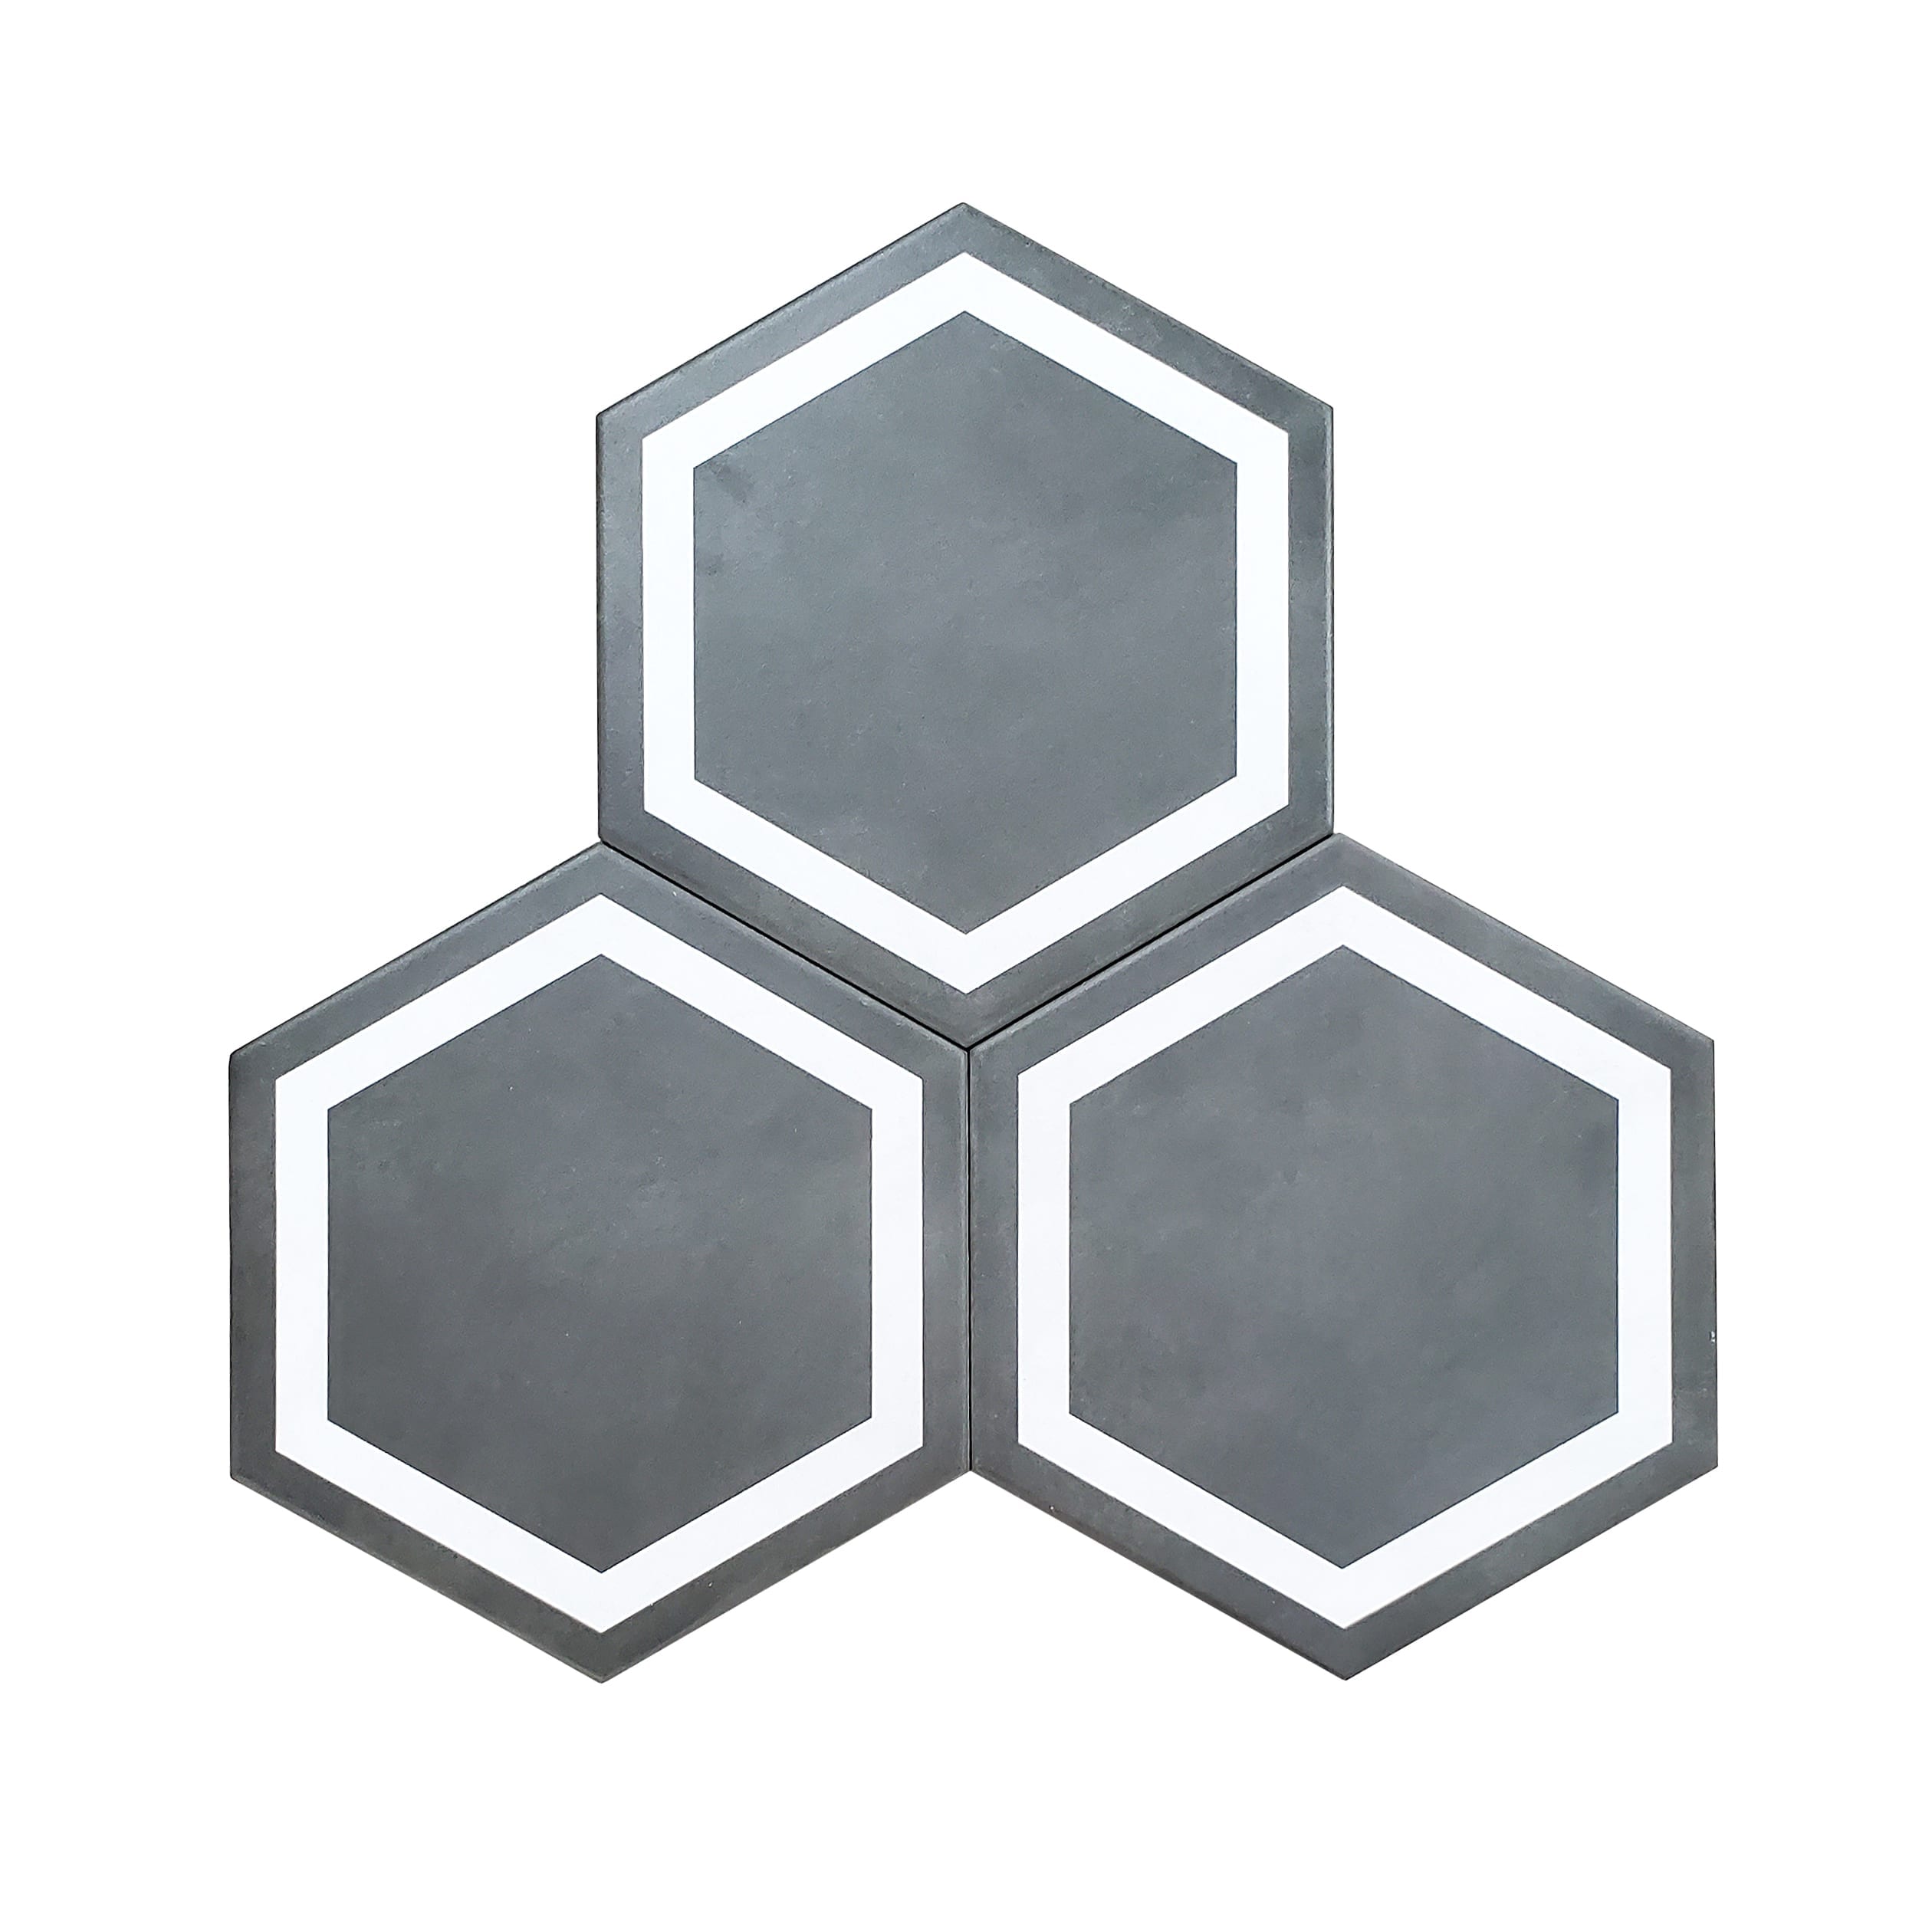 7×8 Form Hexagon Tile_Graphite wIvory_2.80sfct_3.89r_3.25s